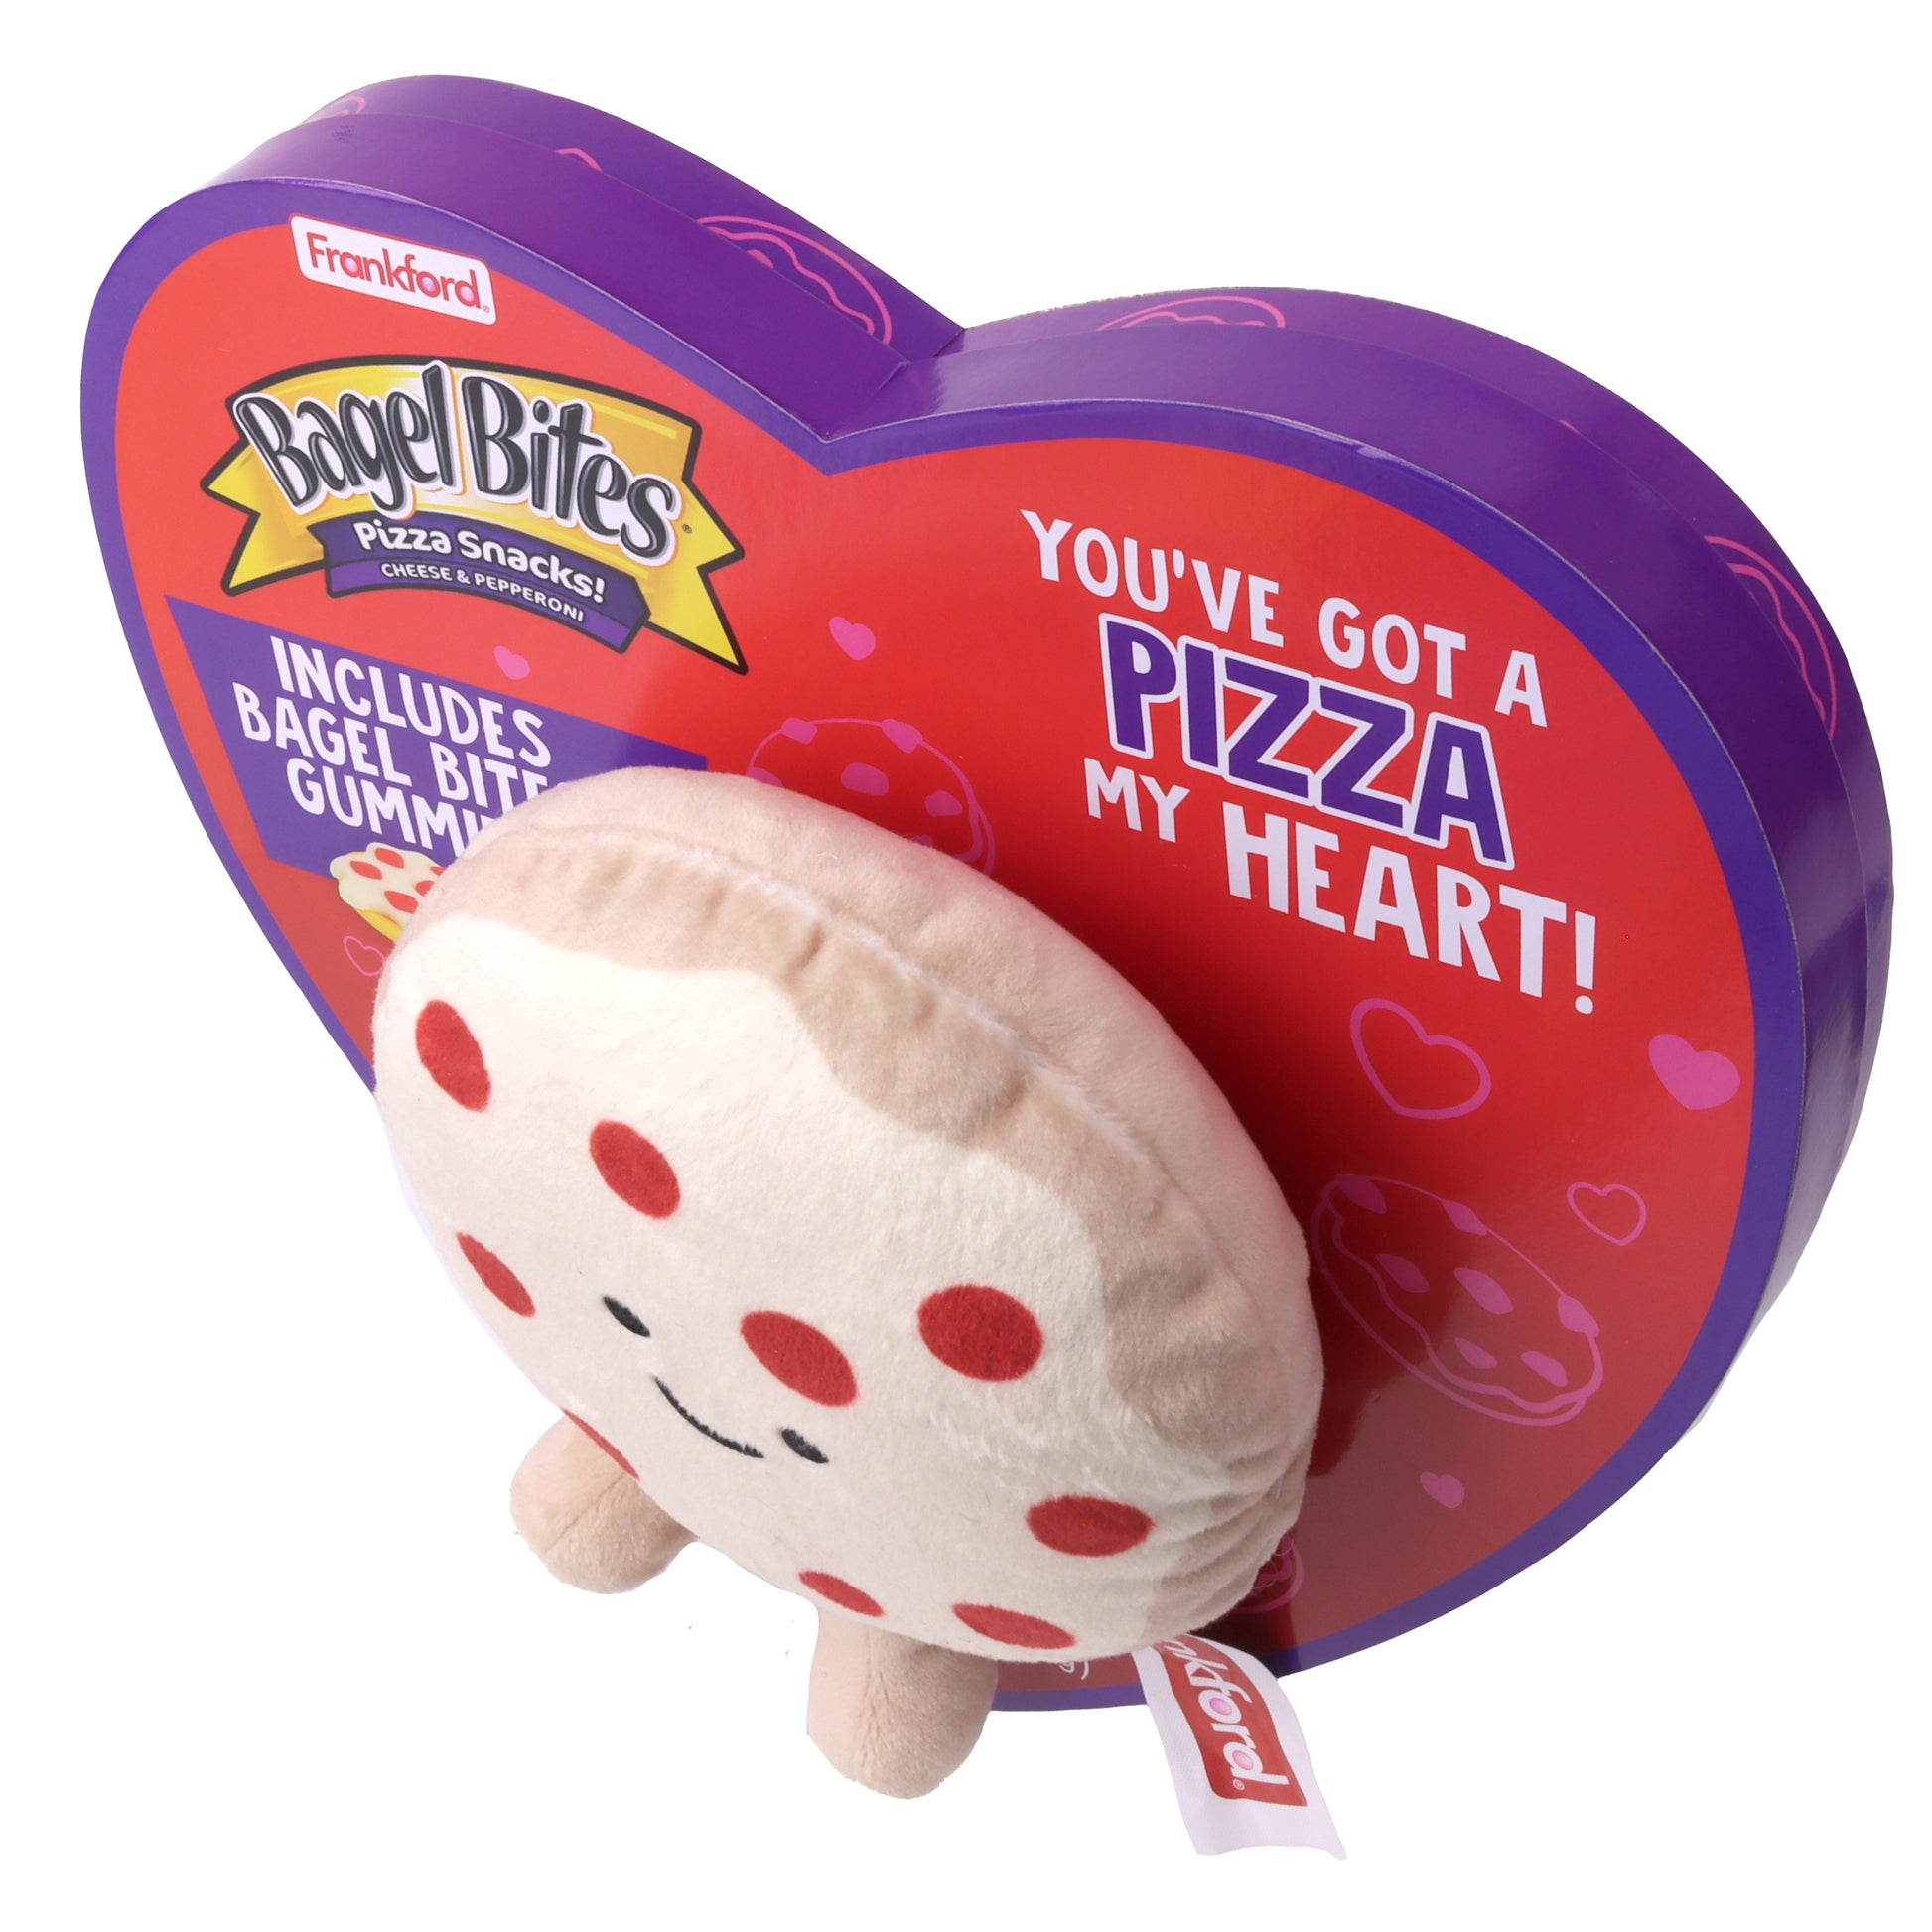 Top right view of a heart shaped box with a bagel bites pizza plush toy on front